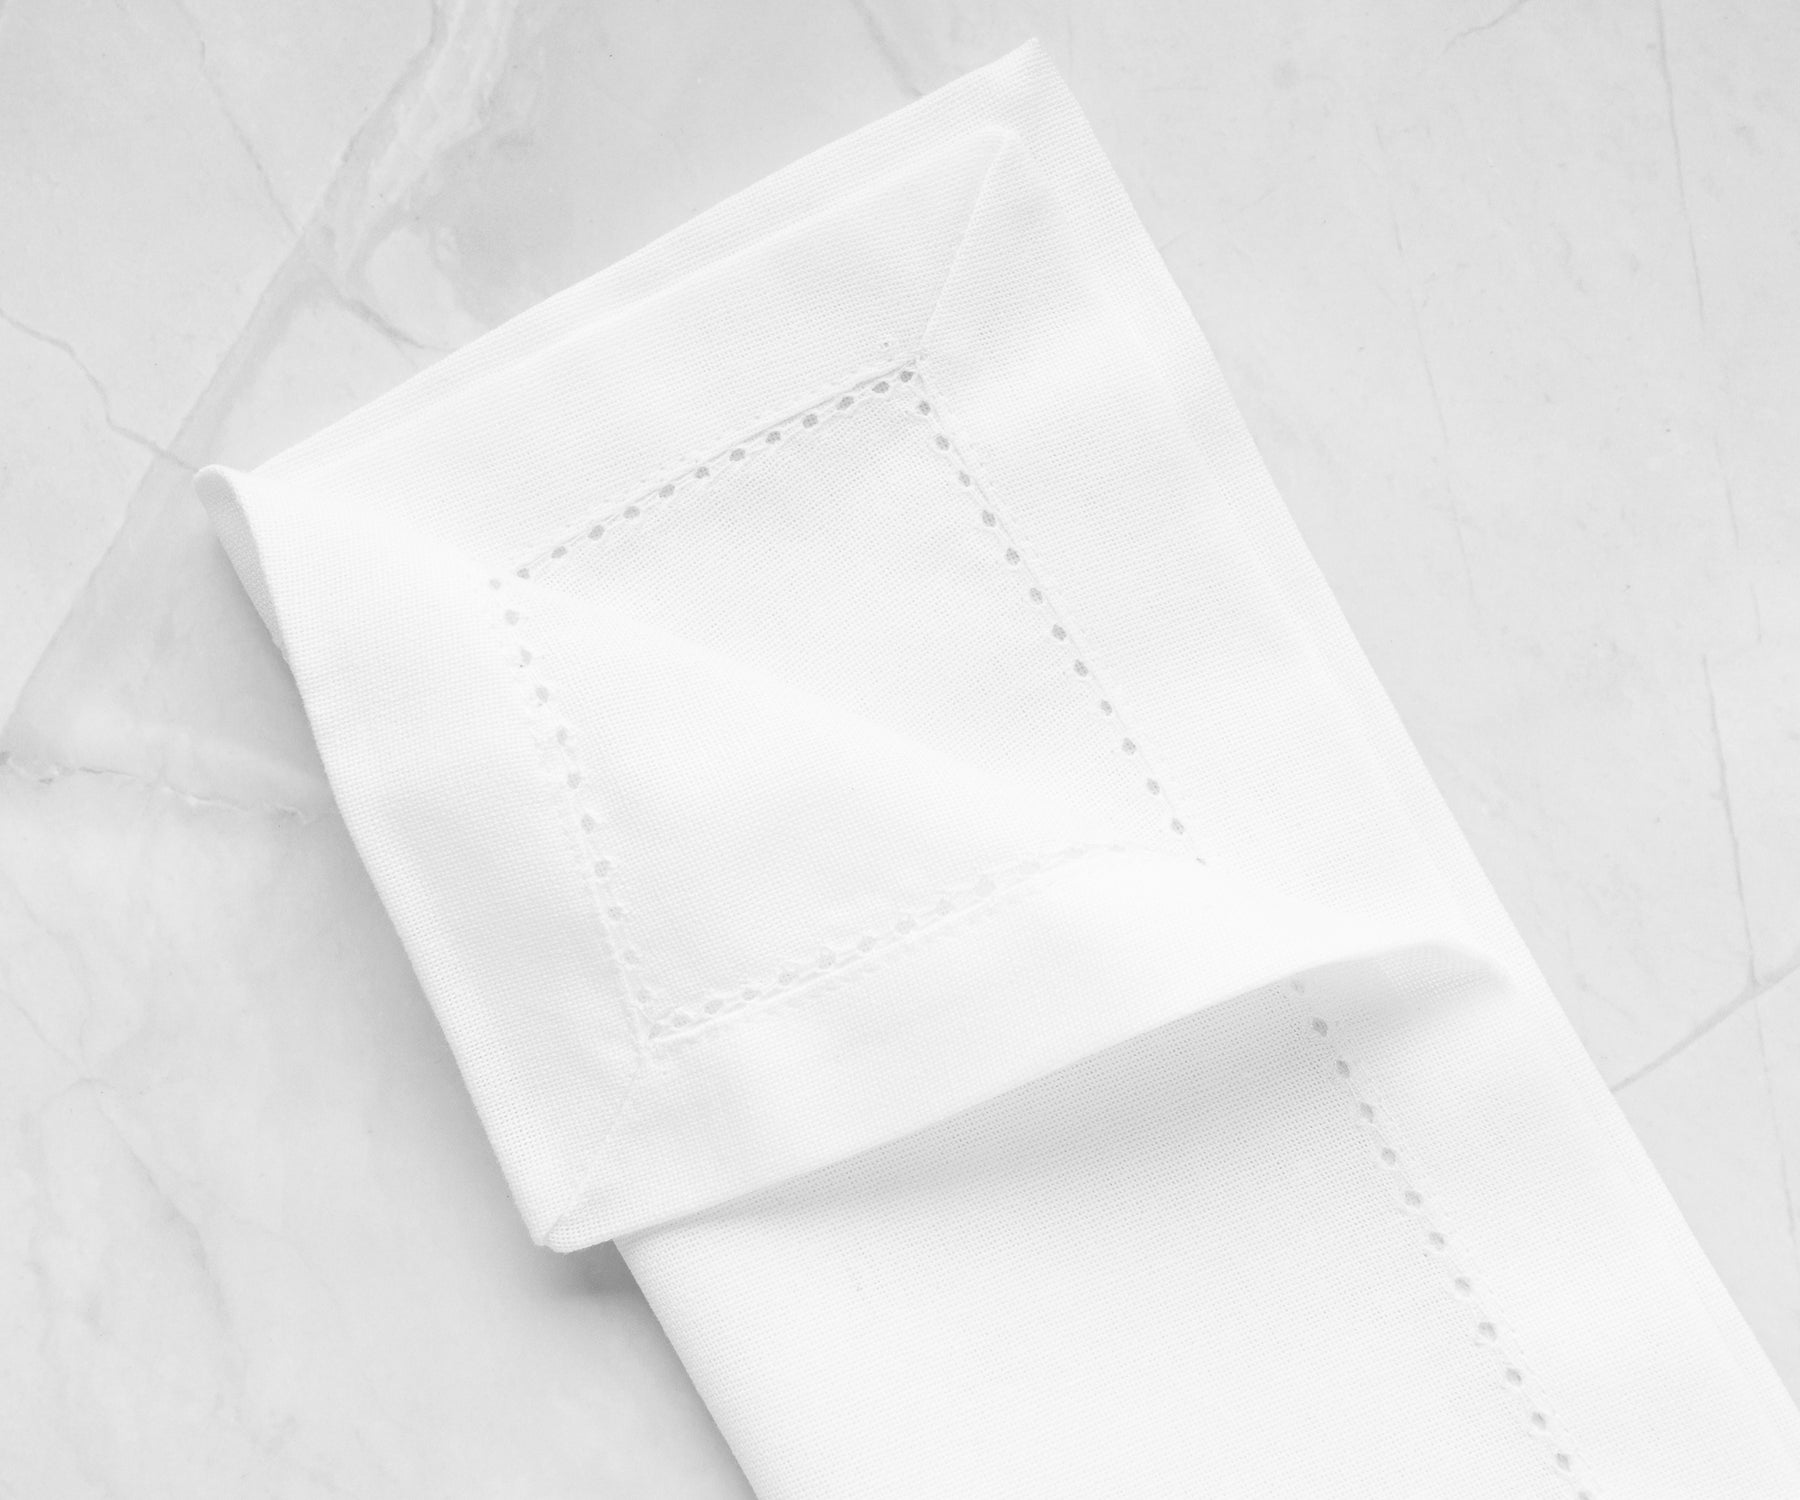 Achieve a classic and crisp look with our White Napkins.